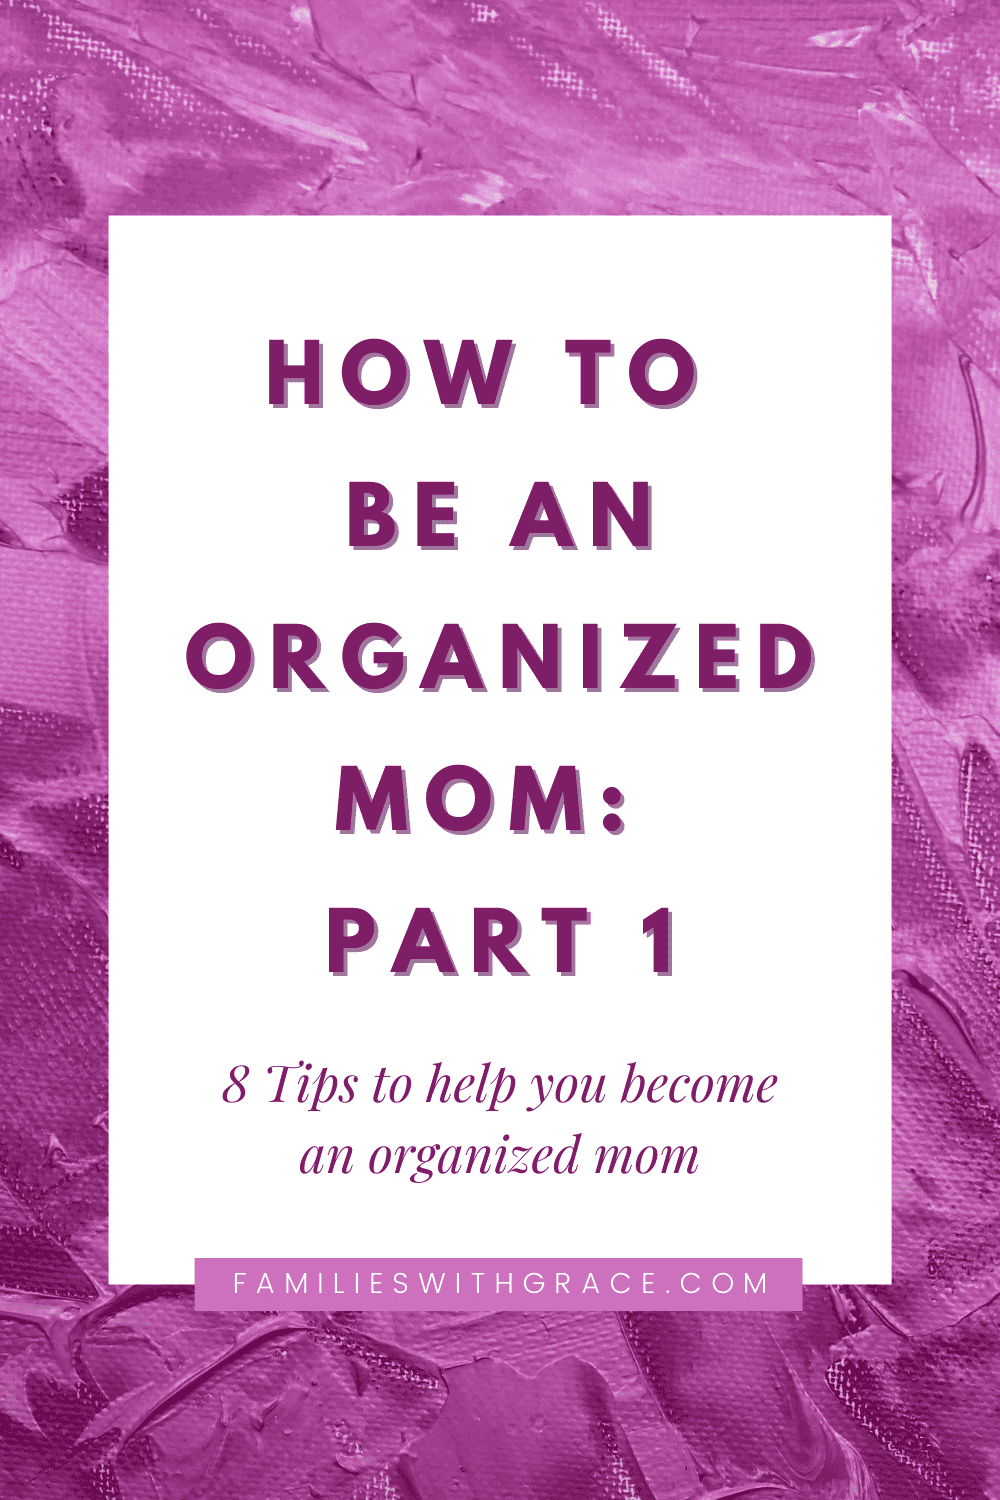 How to be an organized mom -- part 1